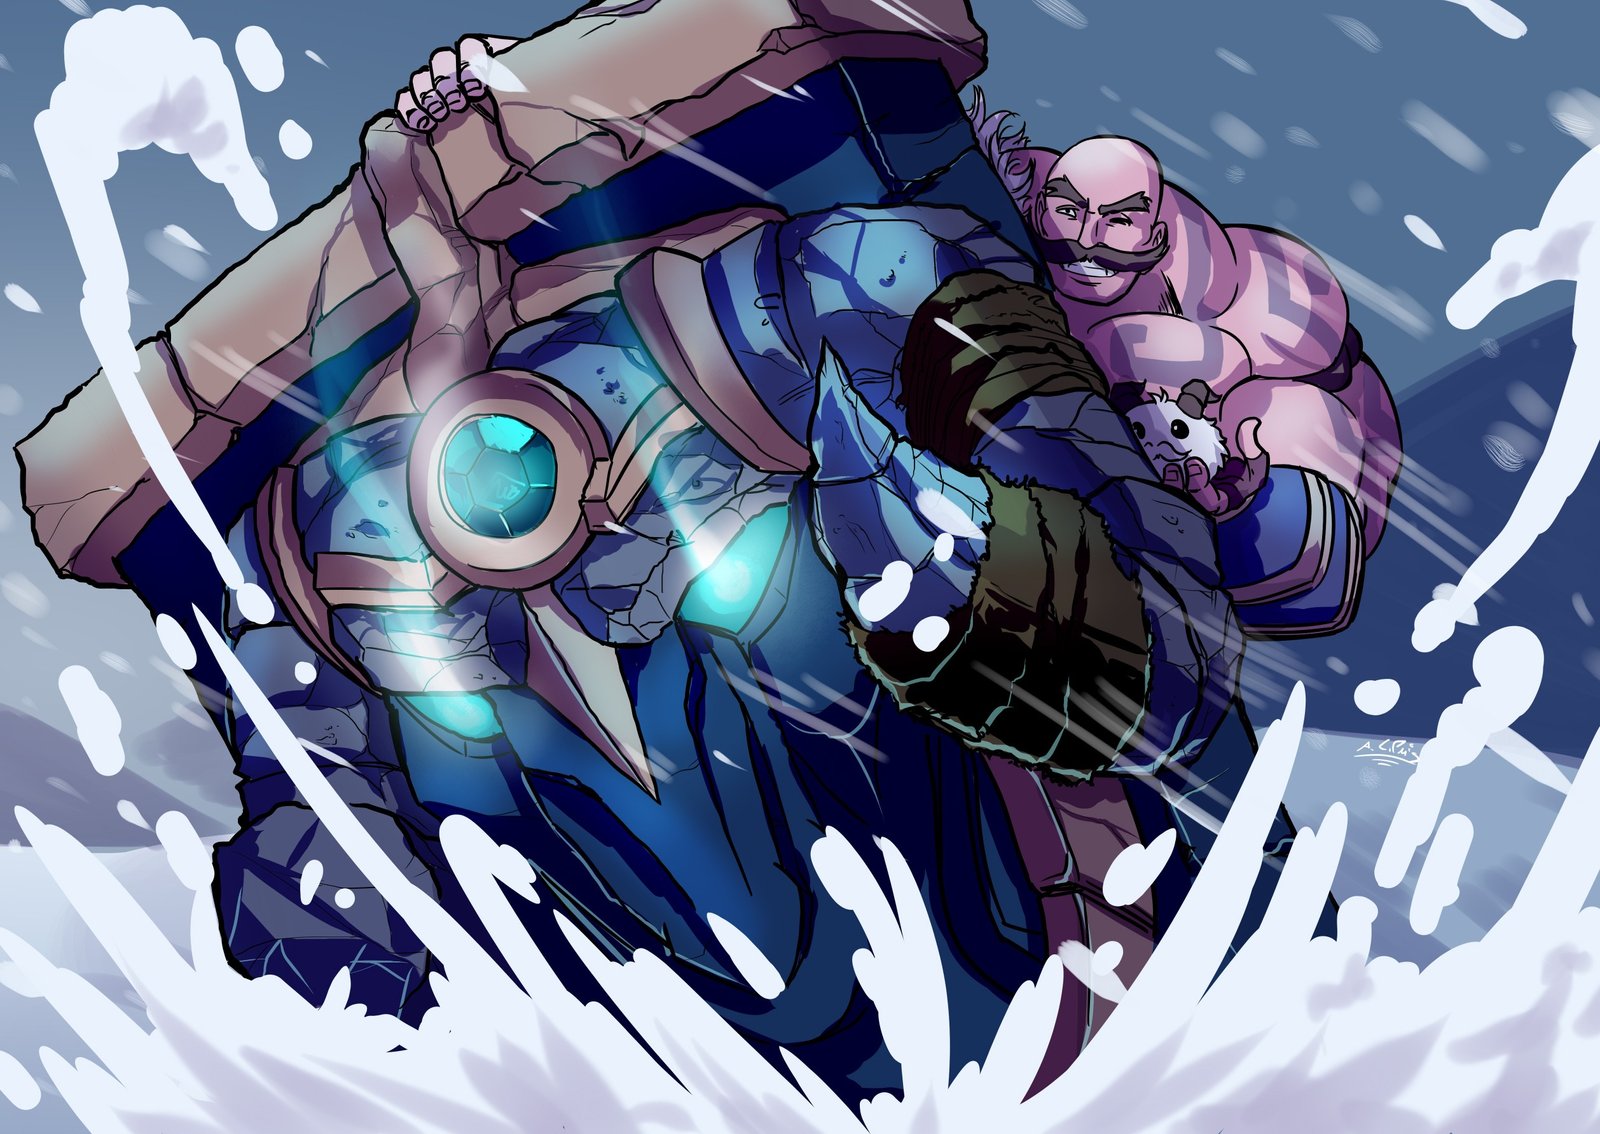 Acrylic painting Braum and Poros League of legends.